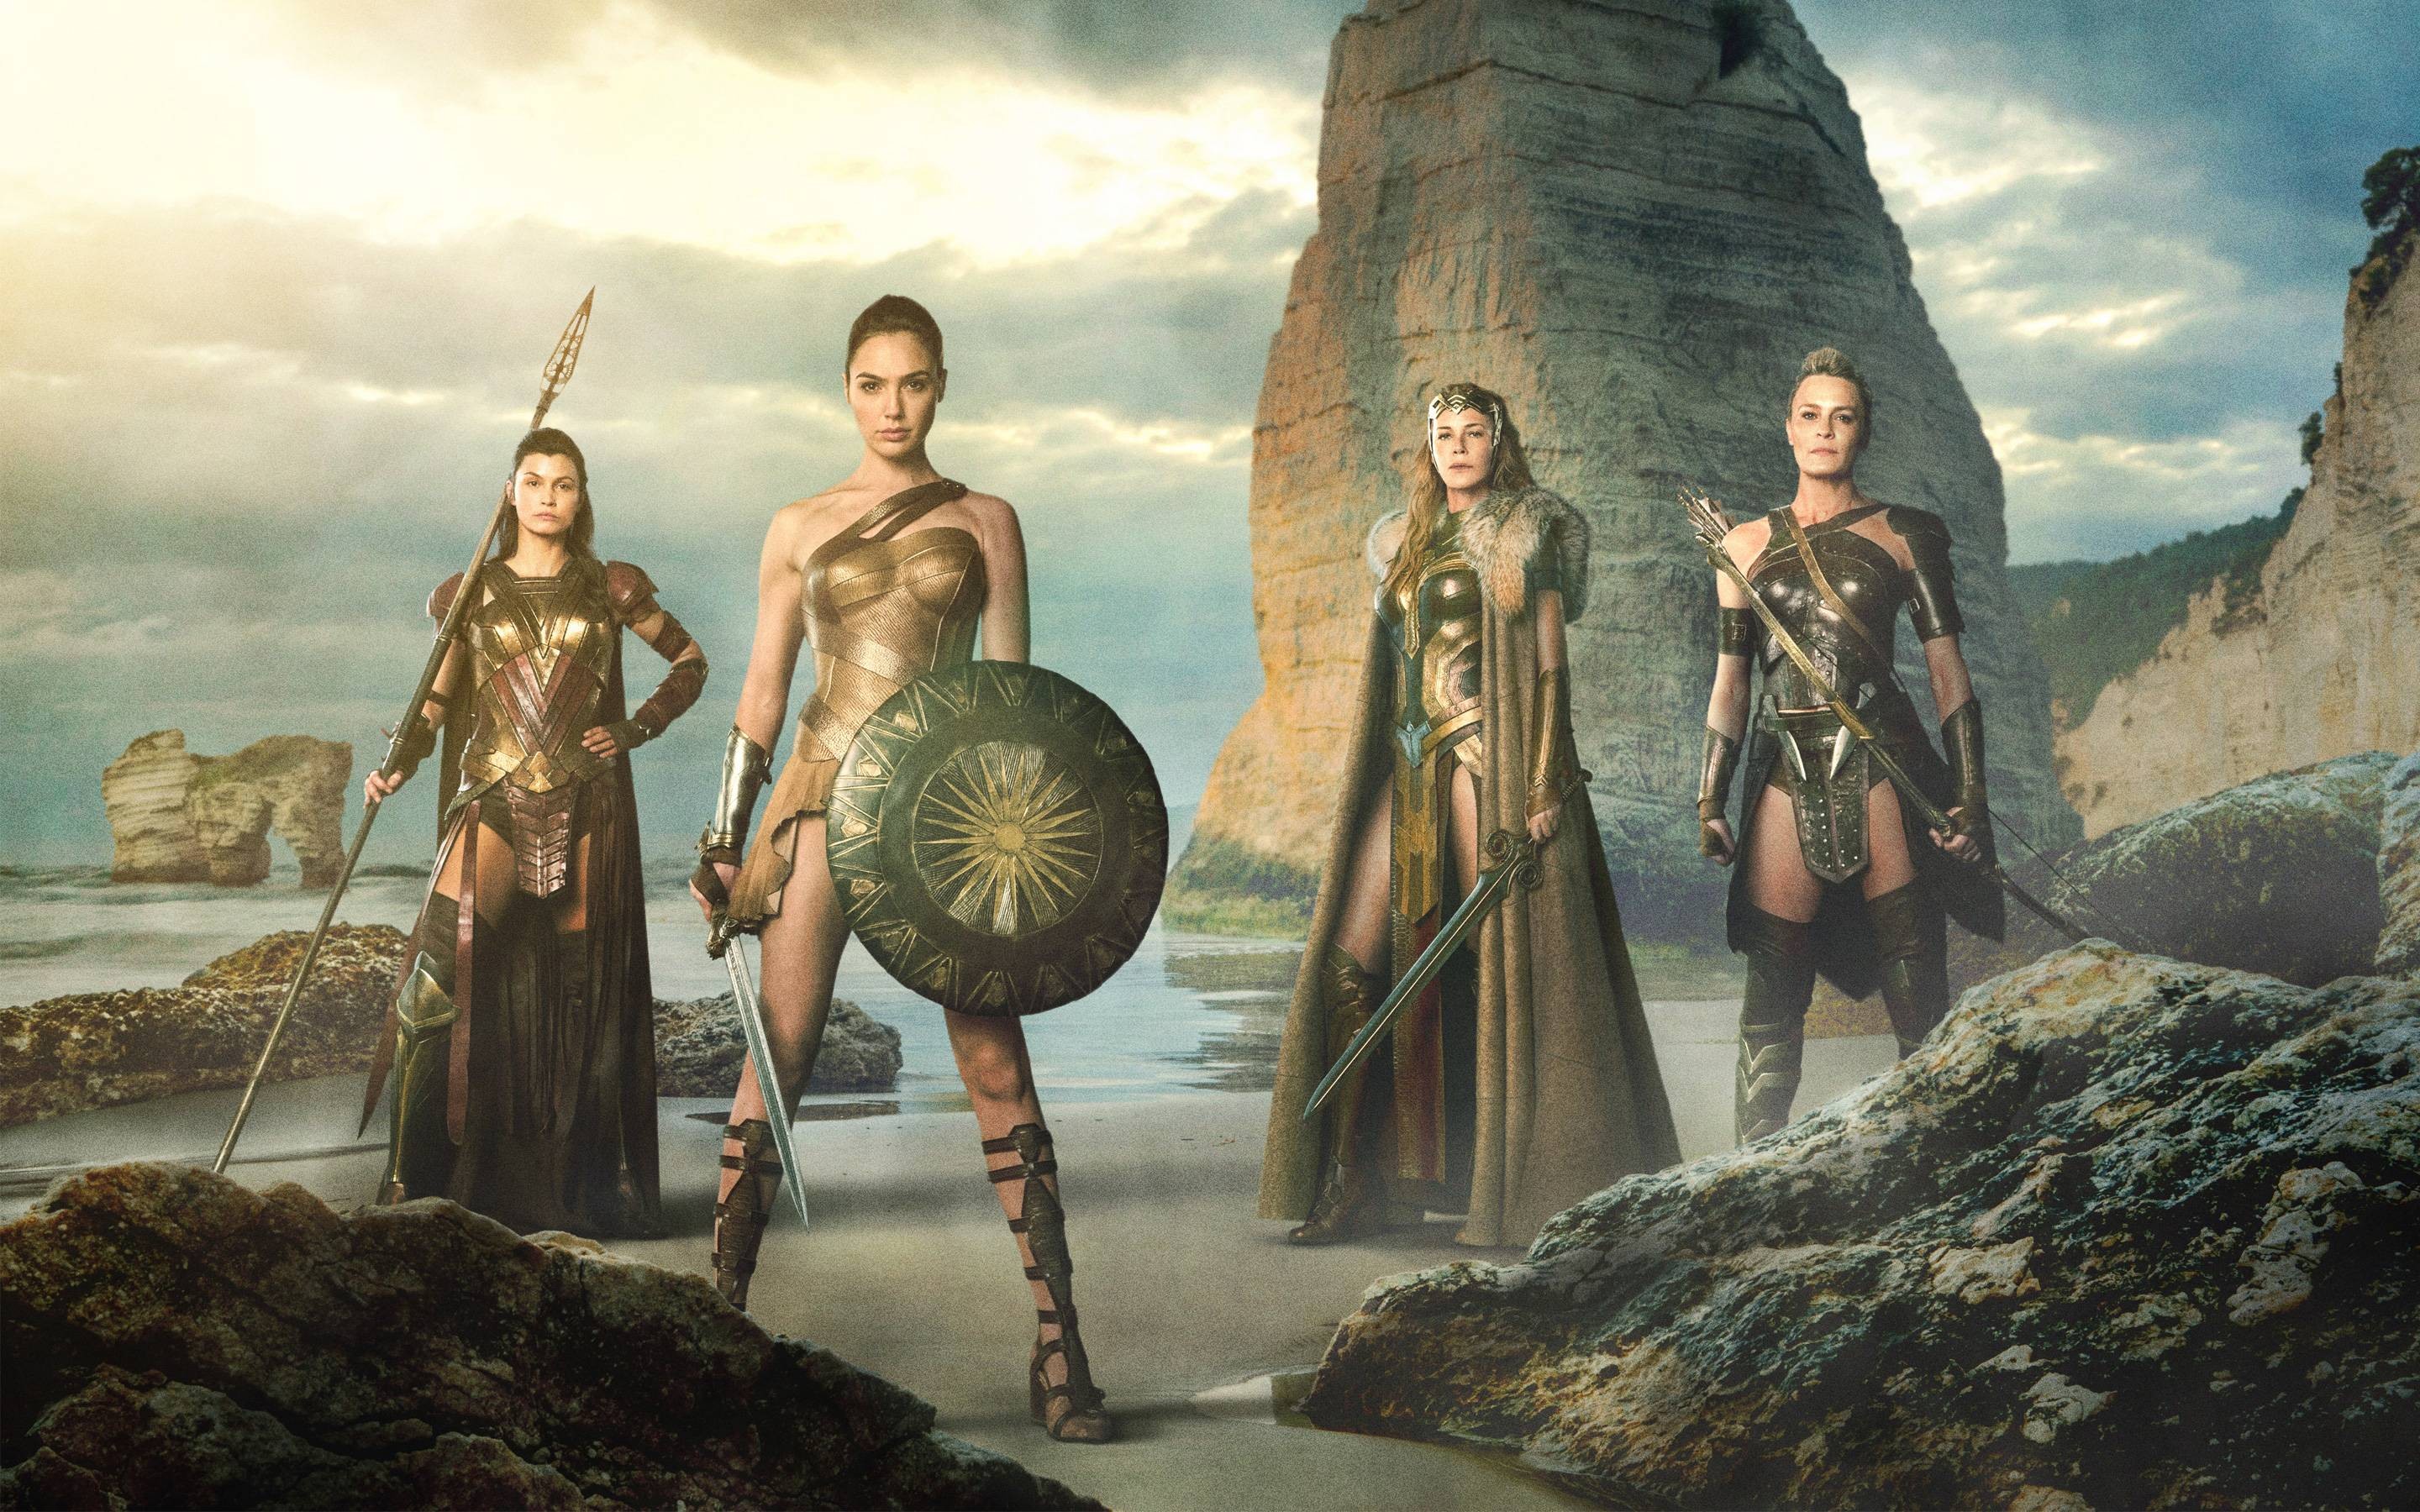 People 2880x1800 women Wonder Woman Gal Gadot Robin Wright armored woman girl in armor movies group of women women with swords sword shield fantasy armor armor actress standing DC Extended Universe fantasy girl girls with guns superheroines